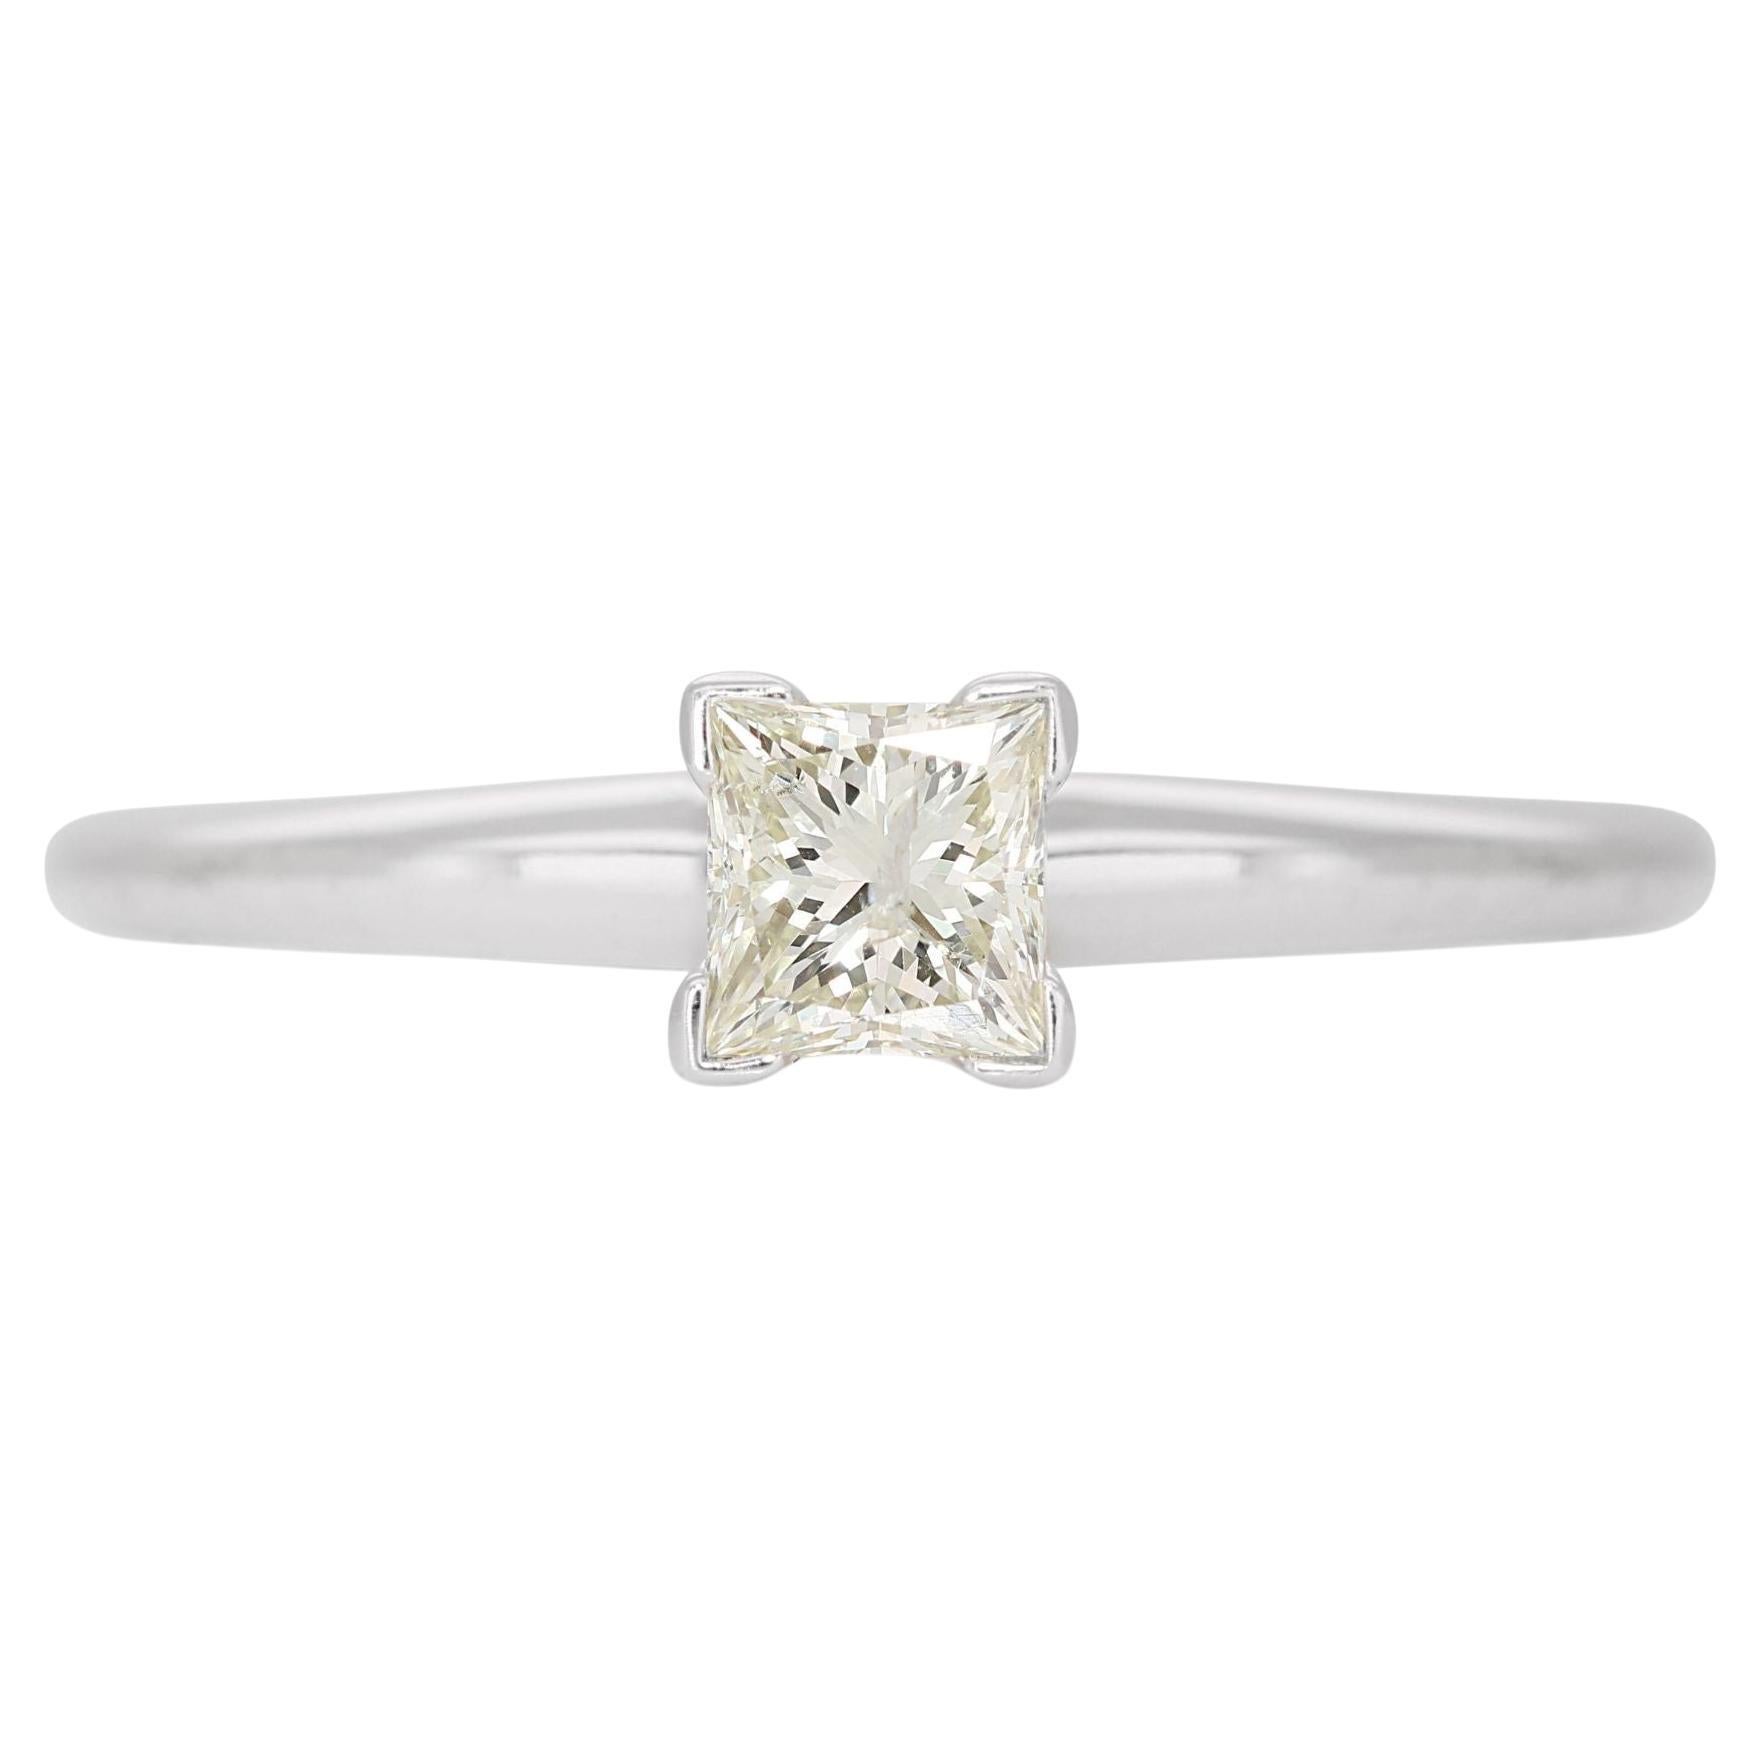 Princess-Cut Diamond in 14K White Gold Ring For Sale